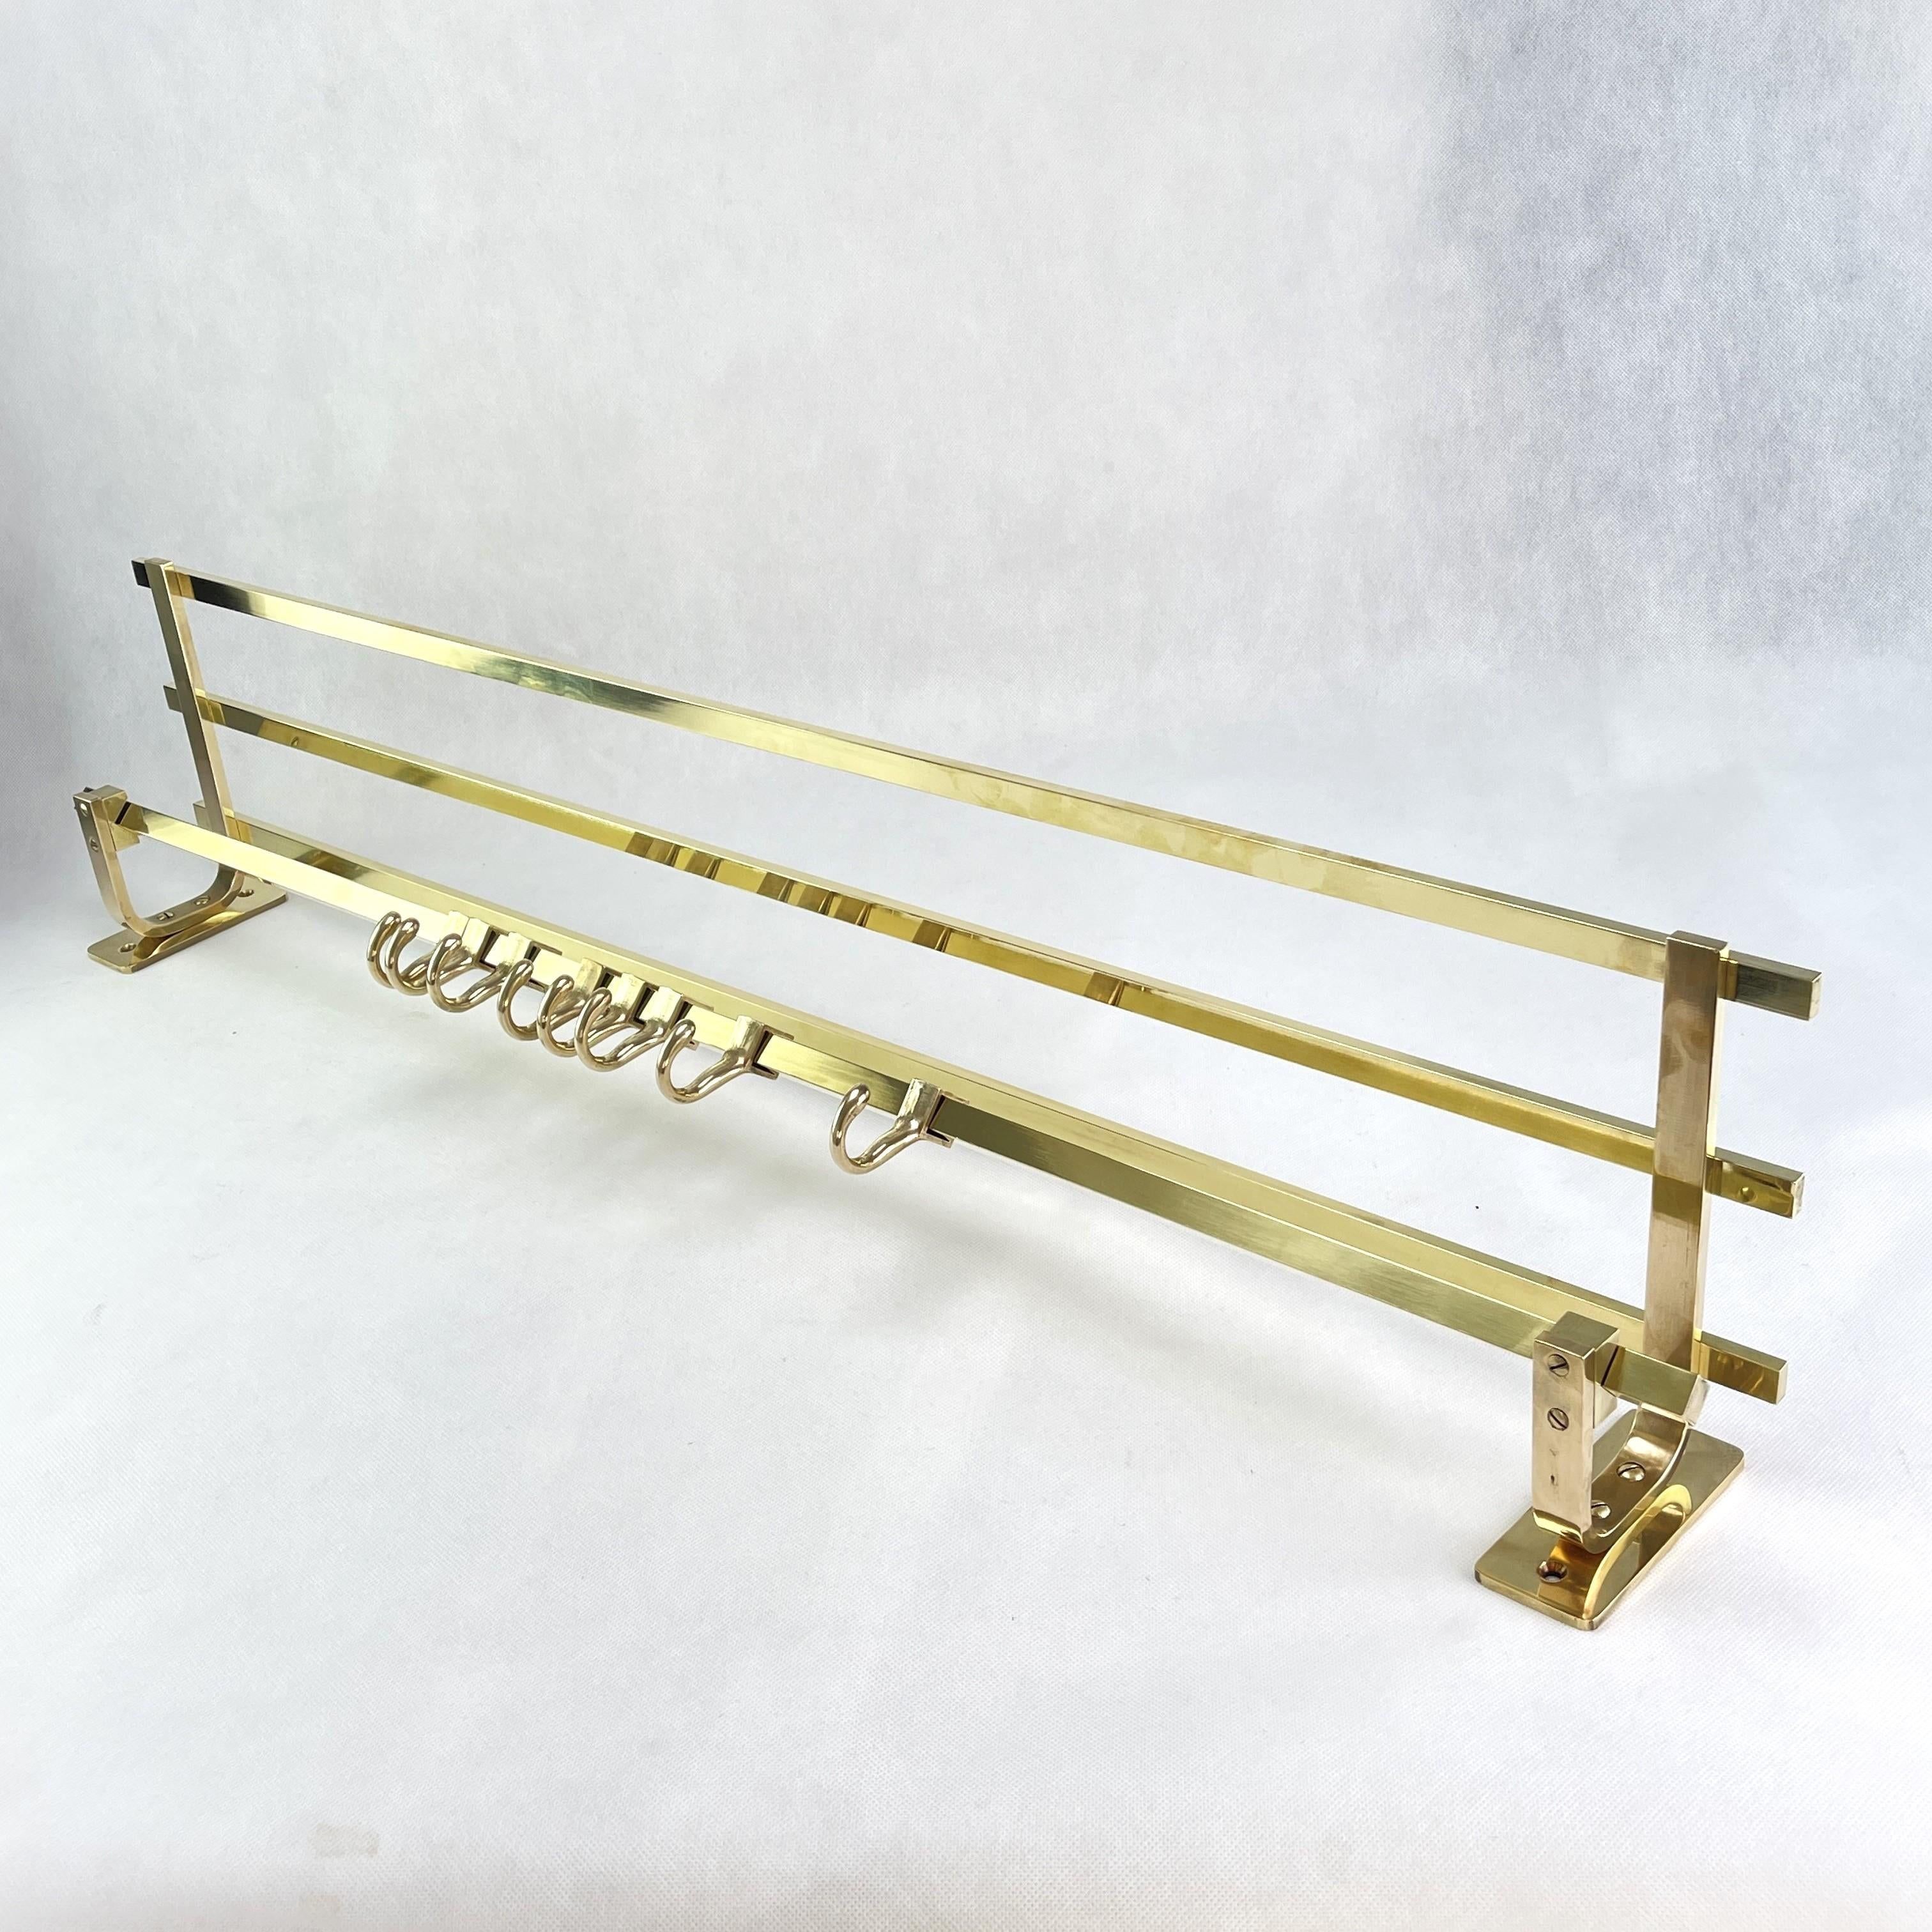 ART DECO Wall Coat Rack Gold Brass 1930s

This unique coat rack combines nostalgic charm with practical functionality and adds a touch of timeless elegance to your entrance area. The 8 movable hooks give you the freedom to adjust the positions